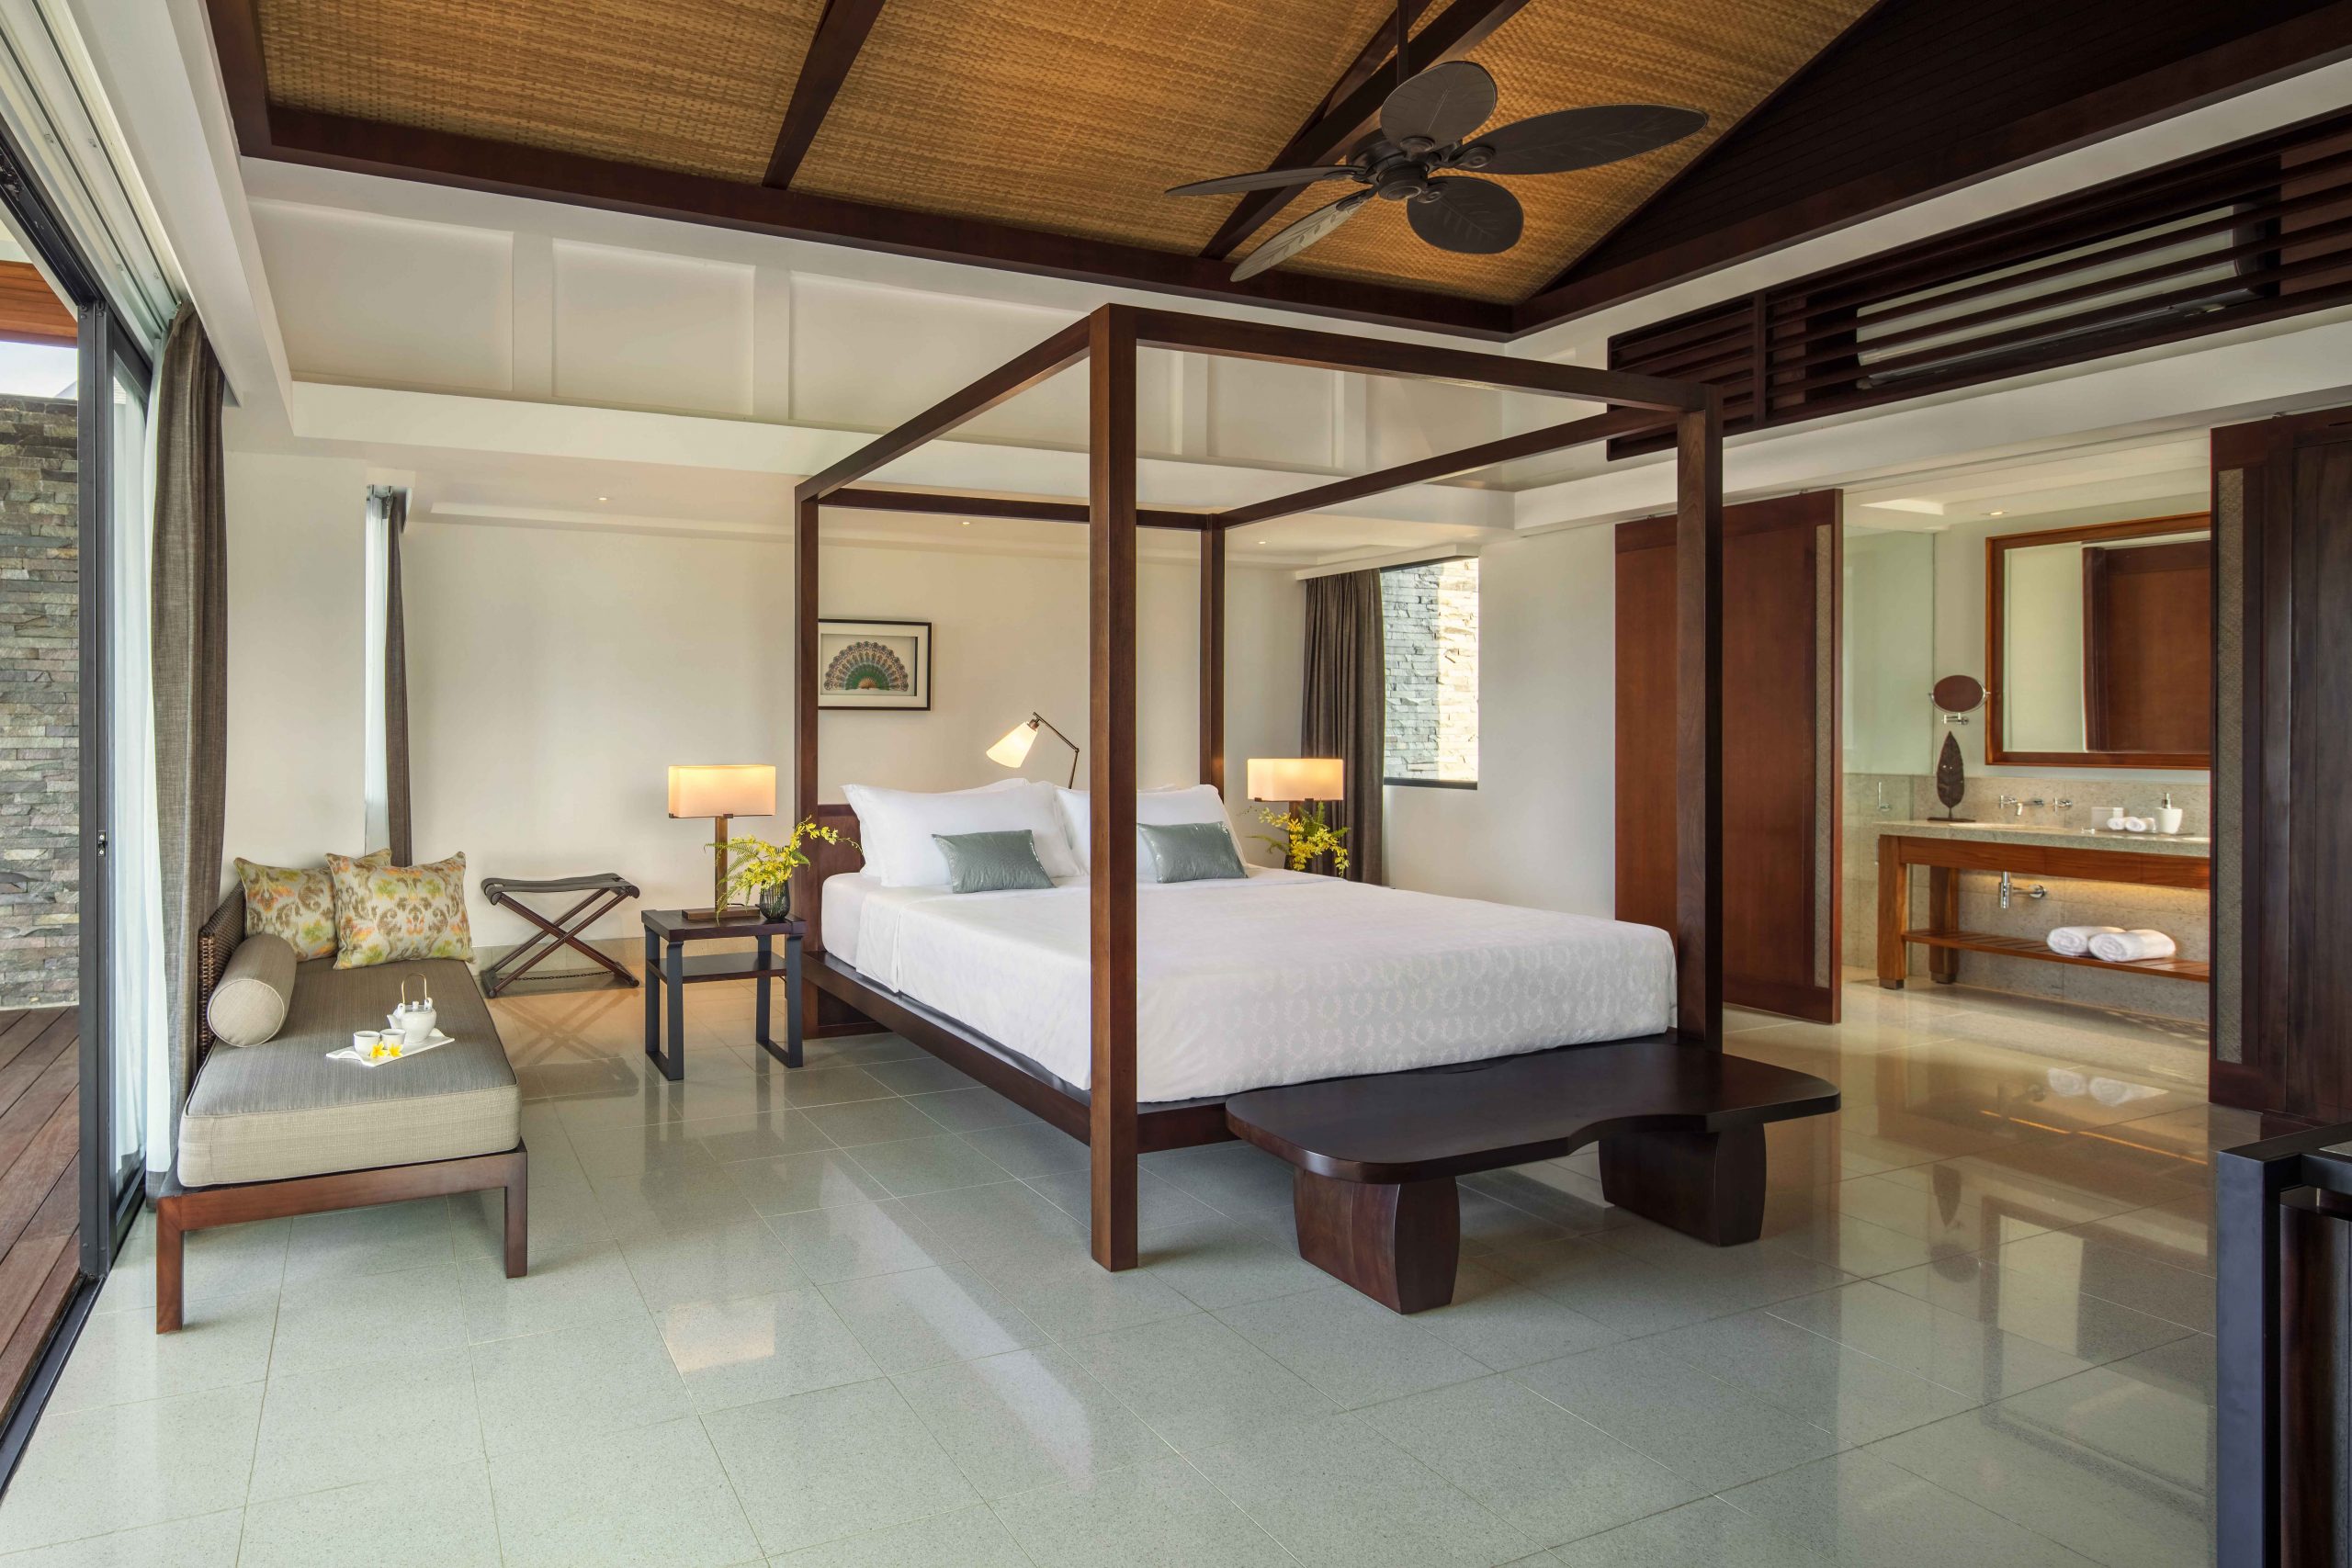 , The Residence Bintan by Cenizaro allows you to reset in nature